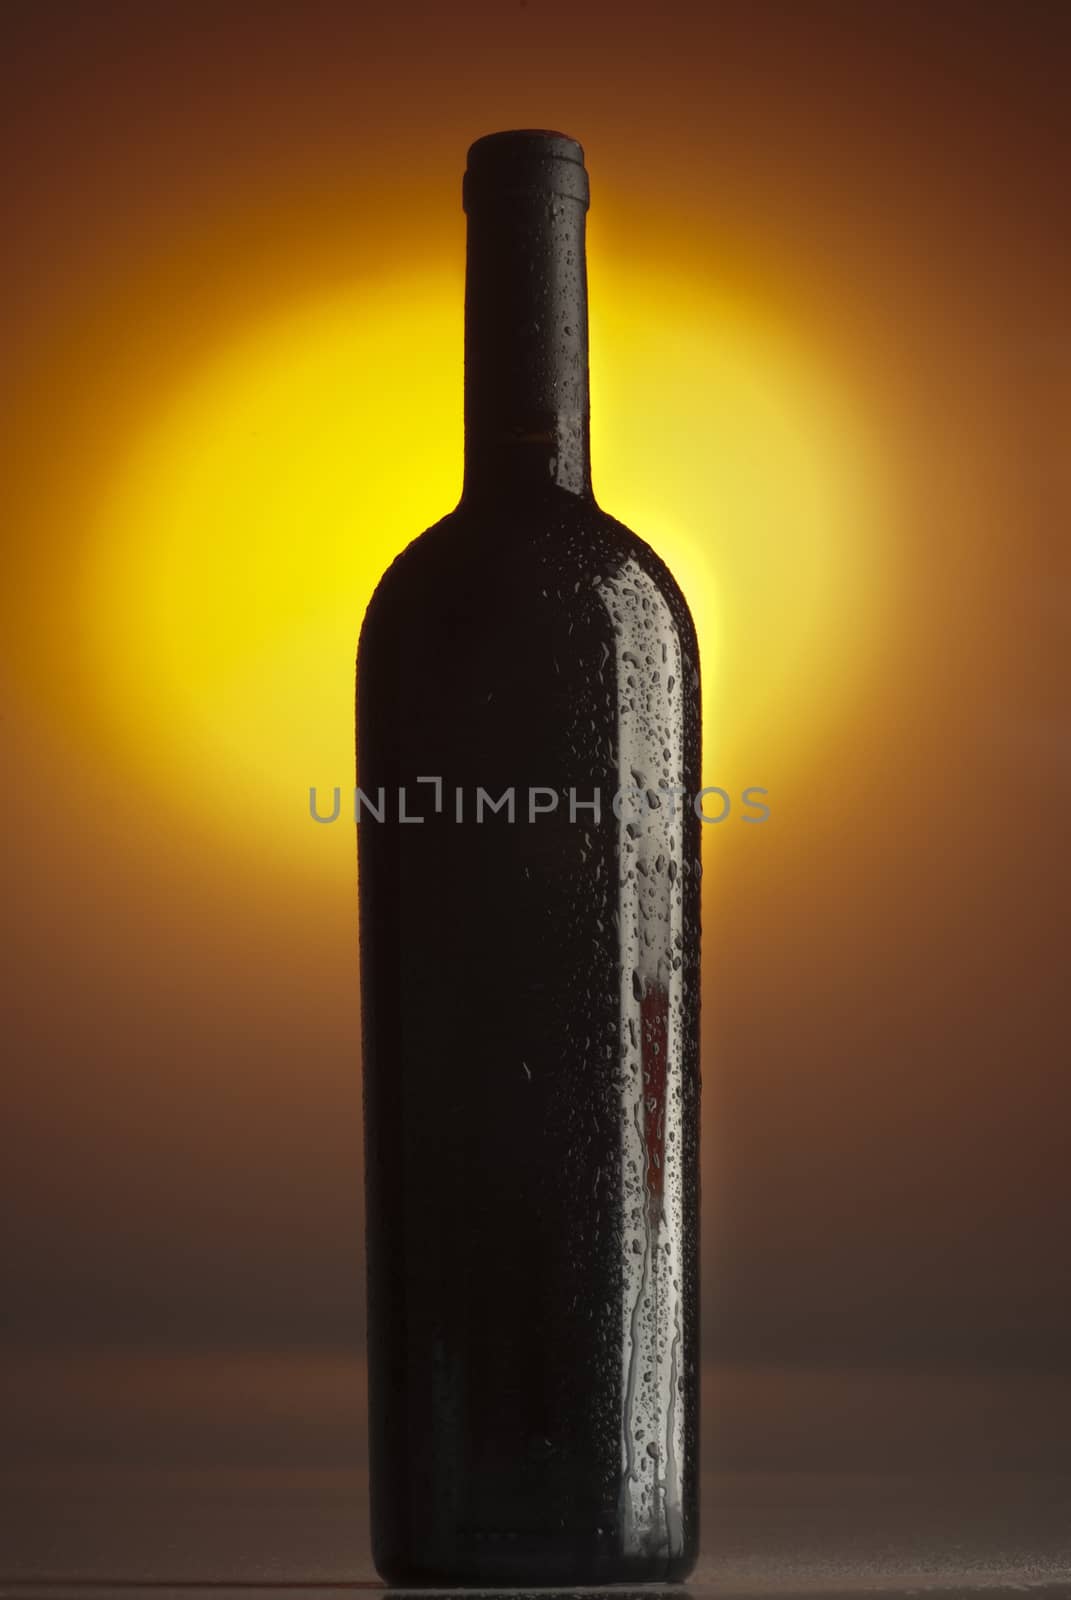 Bottle of wine, reflection of a glass of wine, red wine, drops by jalonsohu@gmail.com